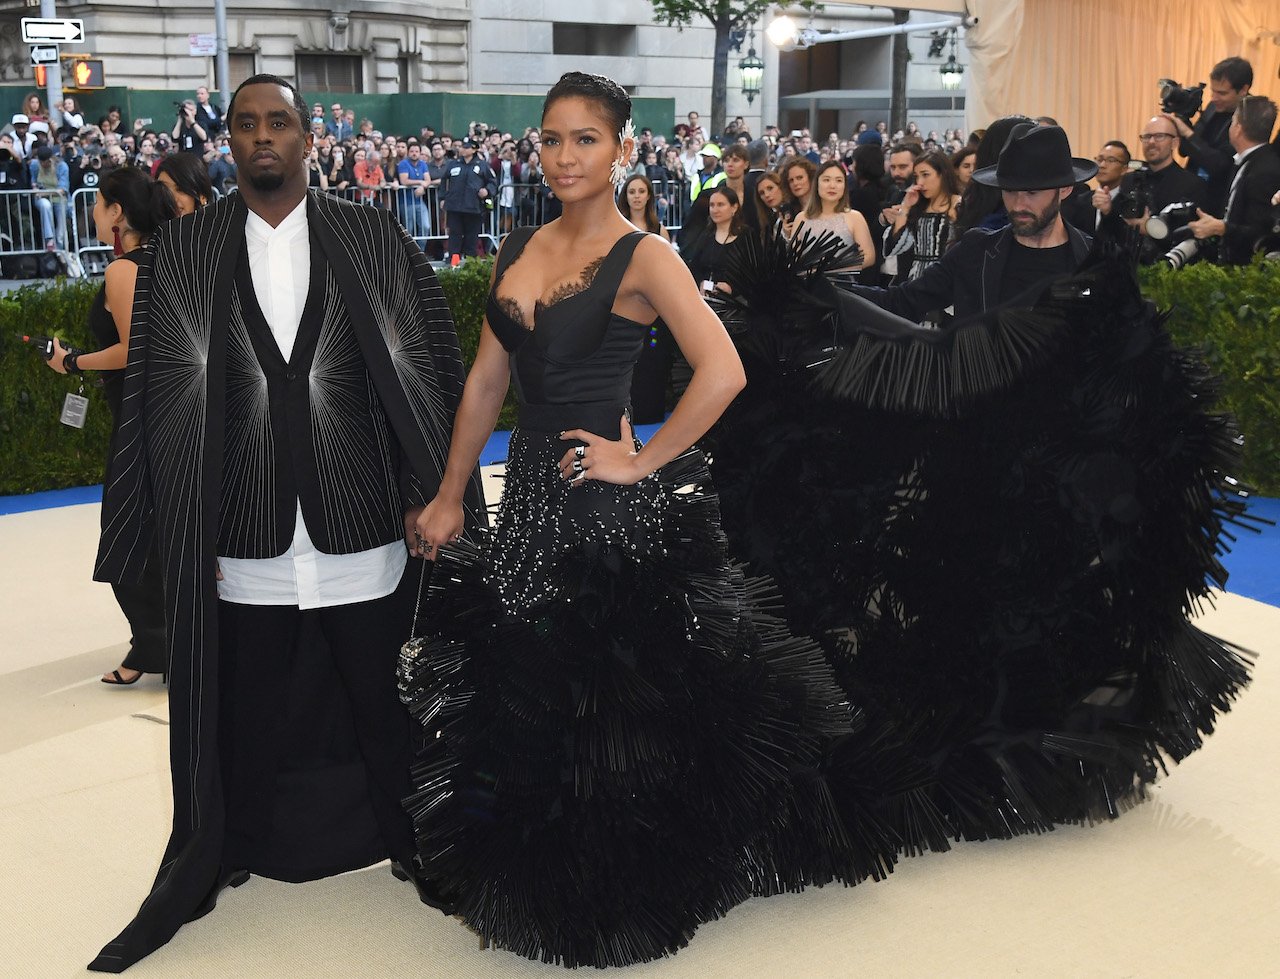 Diddy and Cassie pose together on red carpet at MET Gala; Diddy says his new song is about moving on from Cassie after she married another man